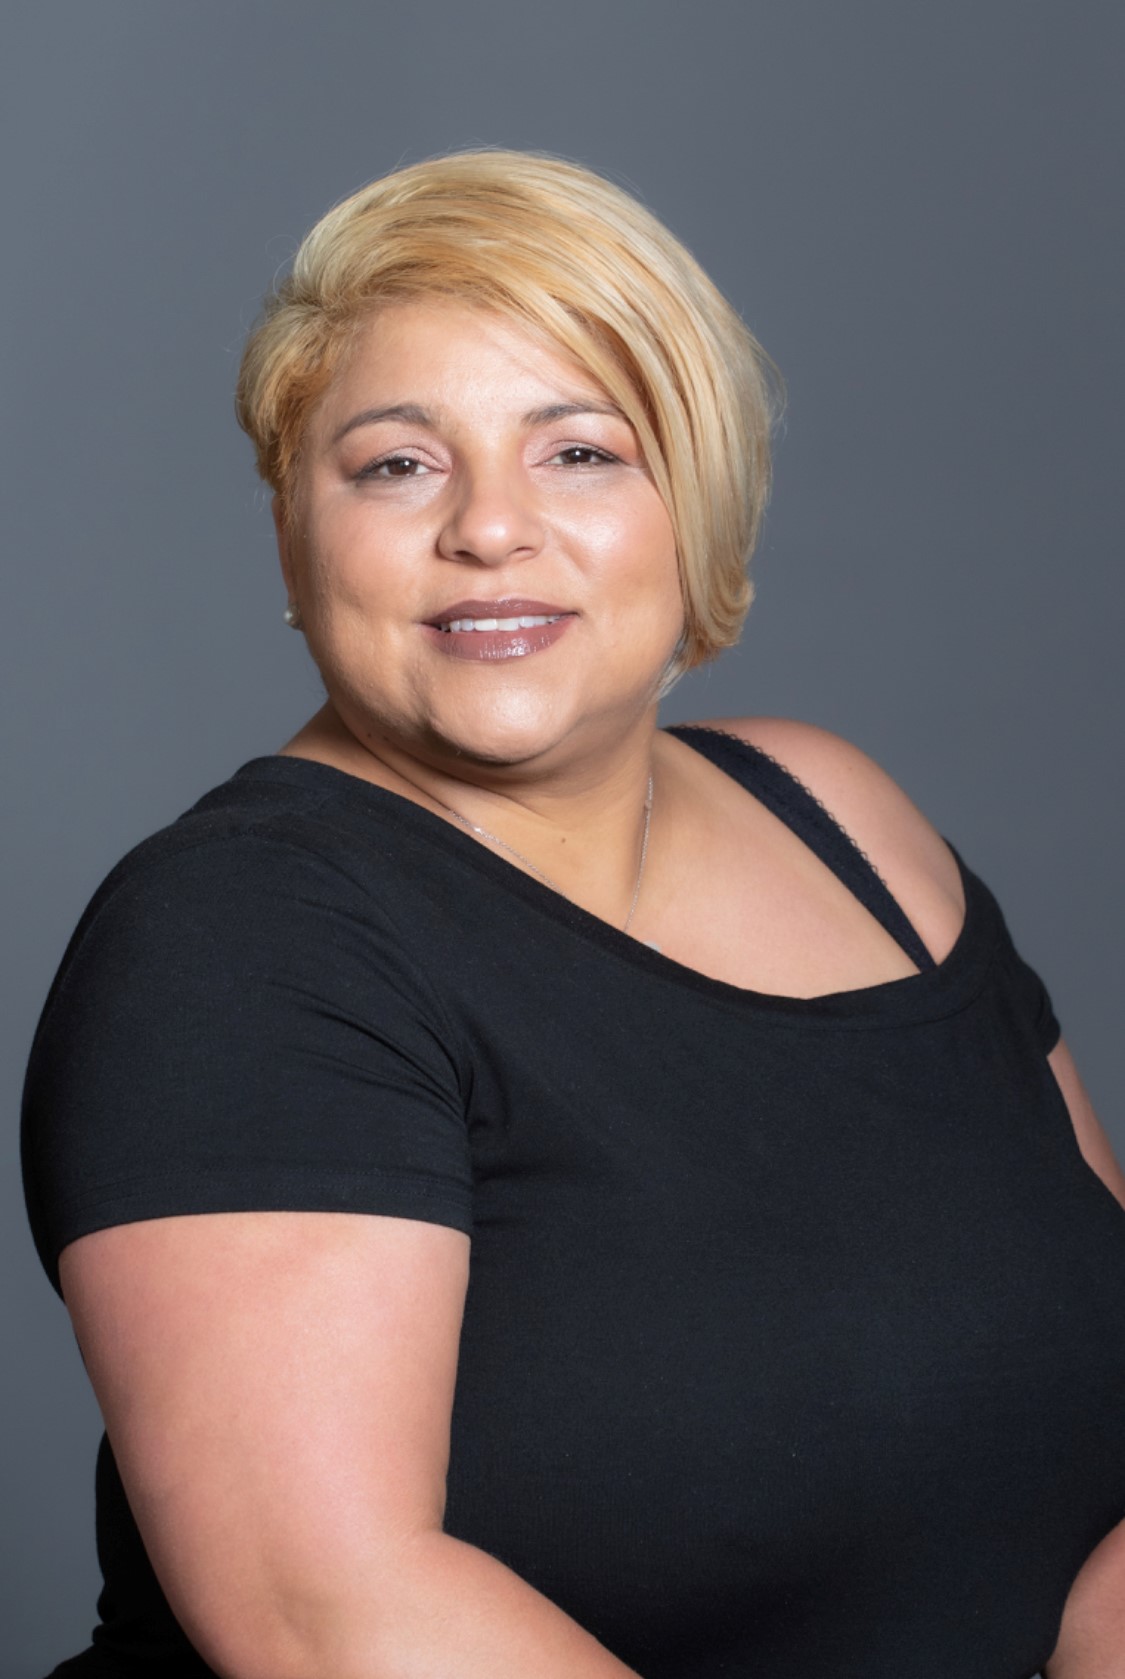 Francheska Velazquez, Owner of Play to Learn Childcare